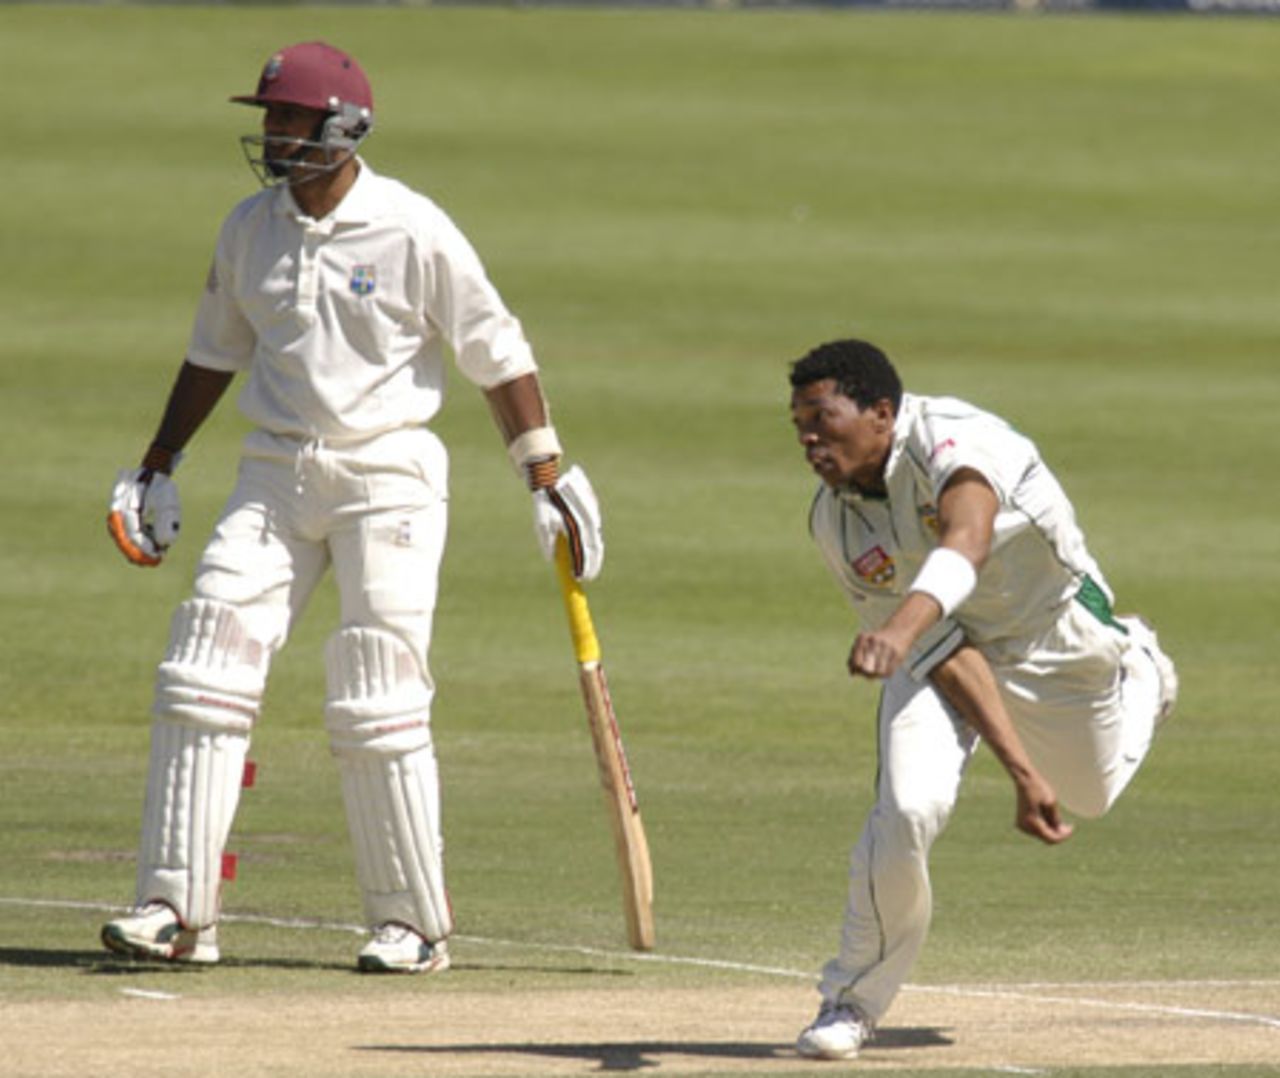 Makhaya Ntini in action against the West Indies at Newlands